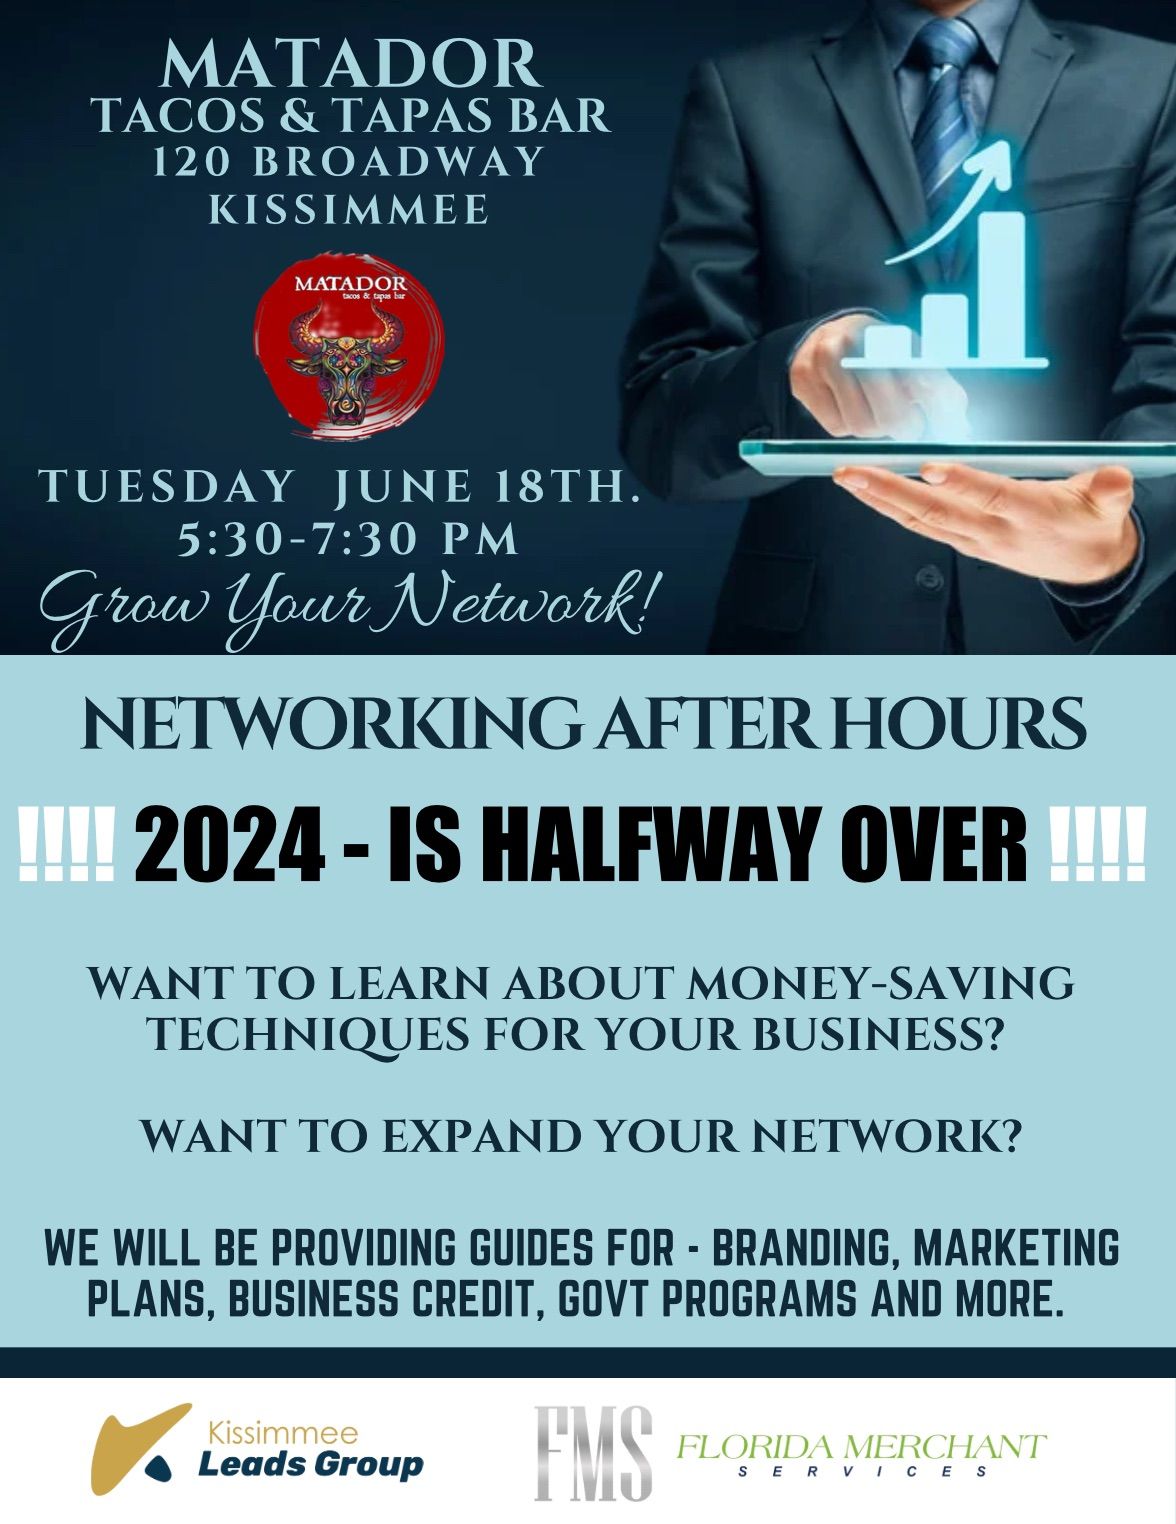 Networking after hours - FREE EVENT by KLG